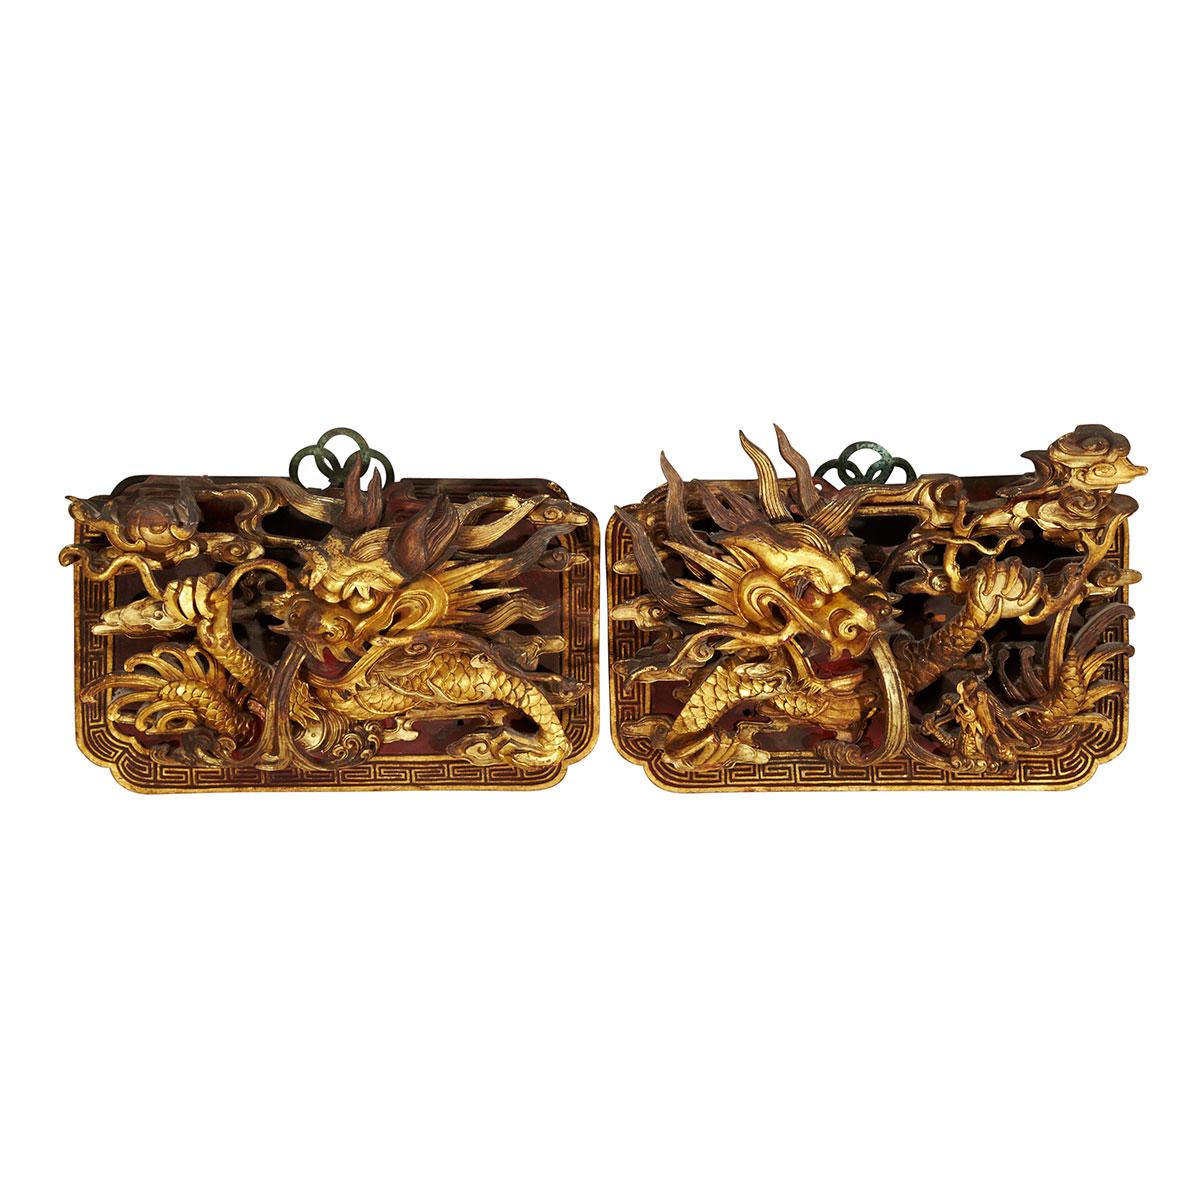 Pair of Gilt Lacquer Dragon Architectural Fragments, 19th Century